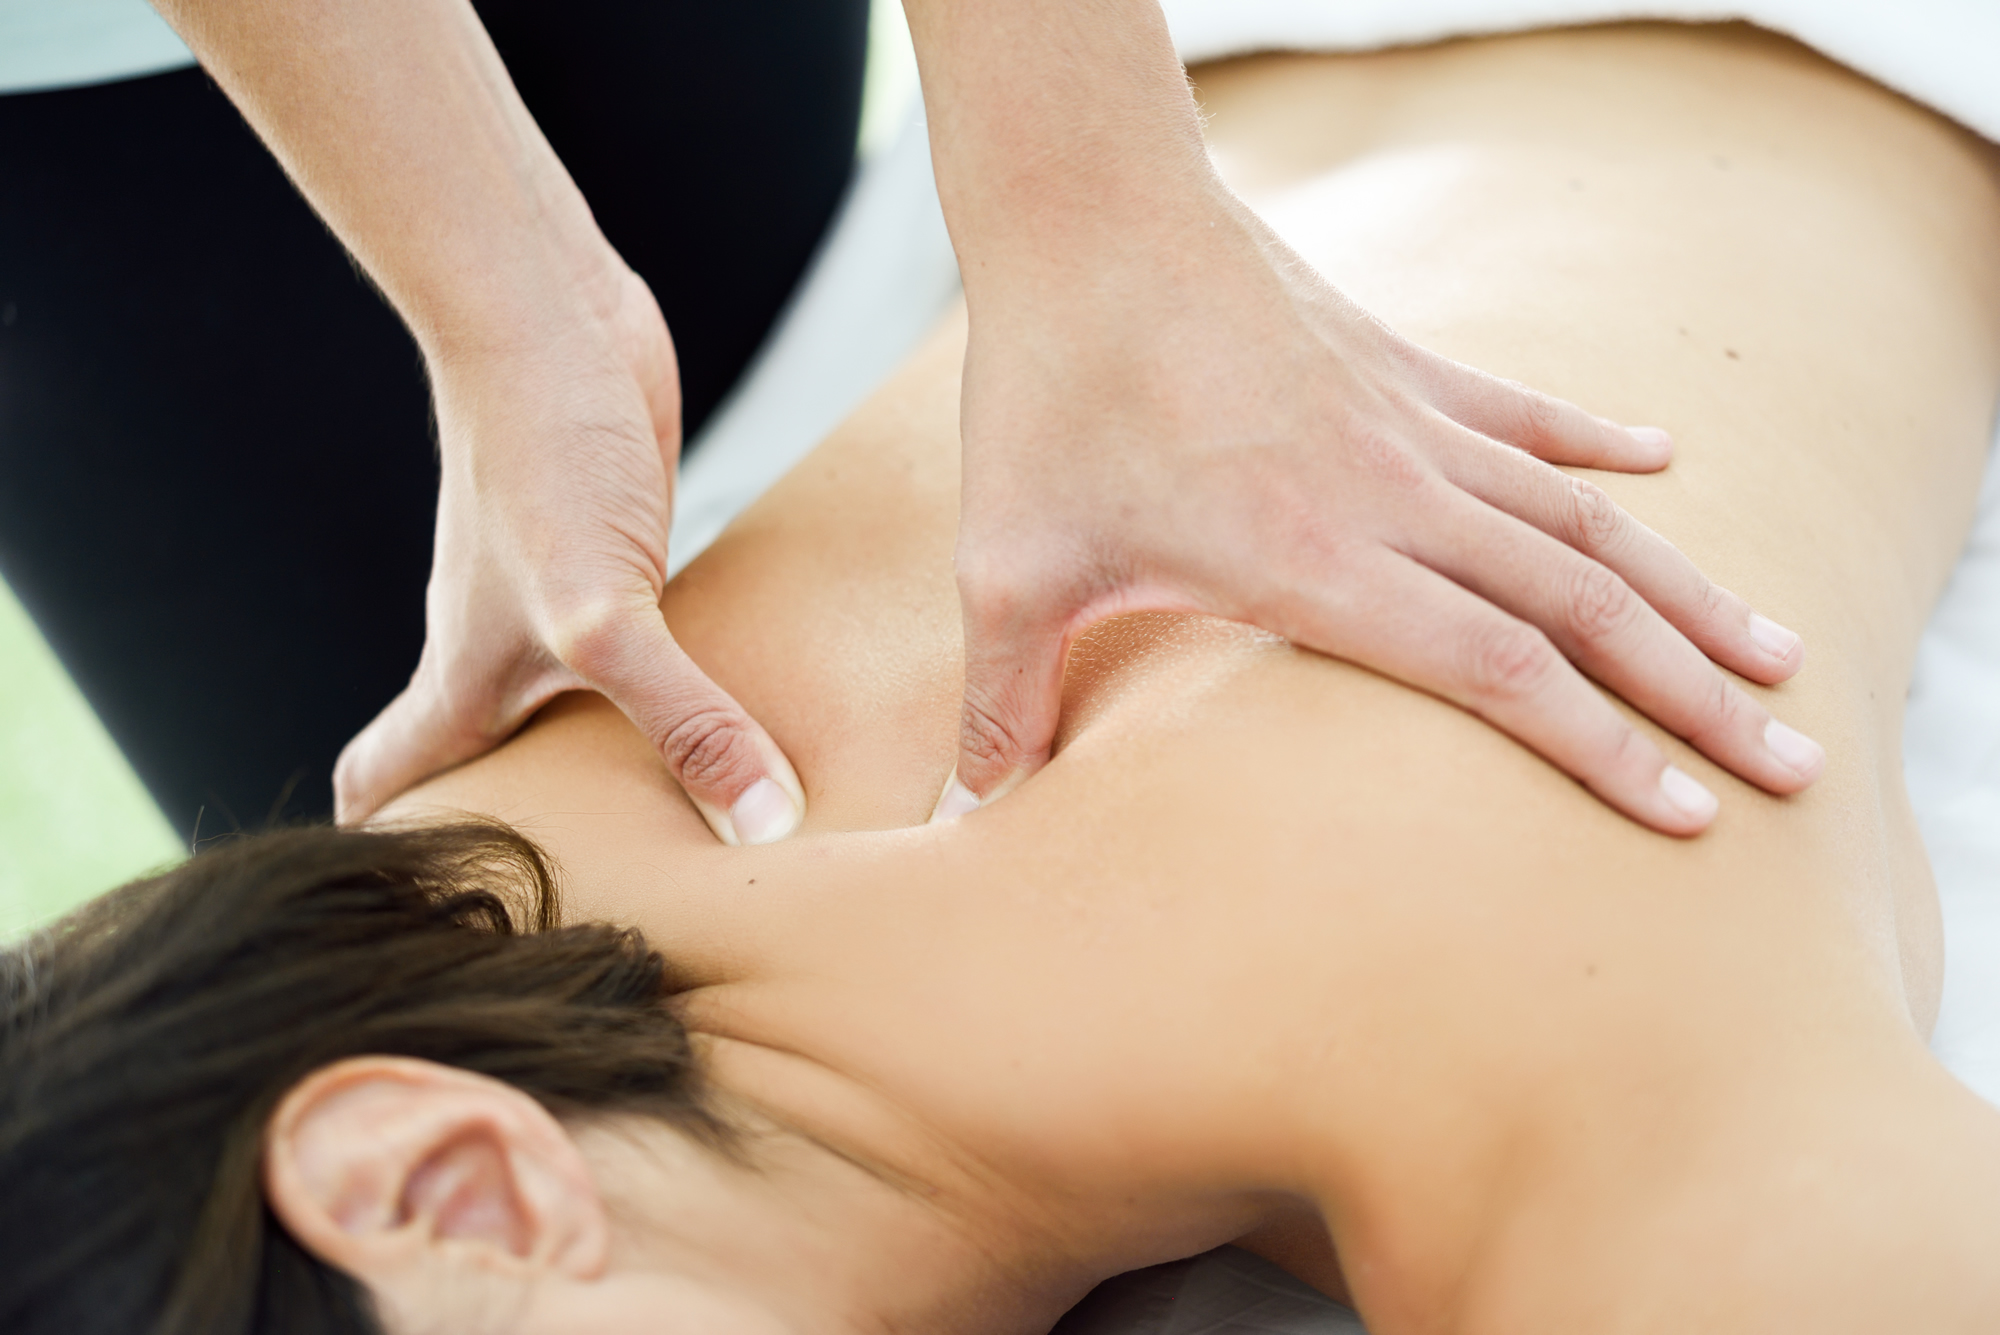 How Much Pressure Is Too Much In Massage?